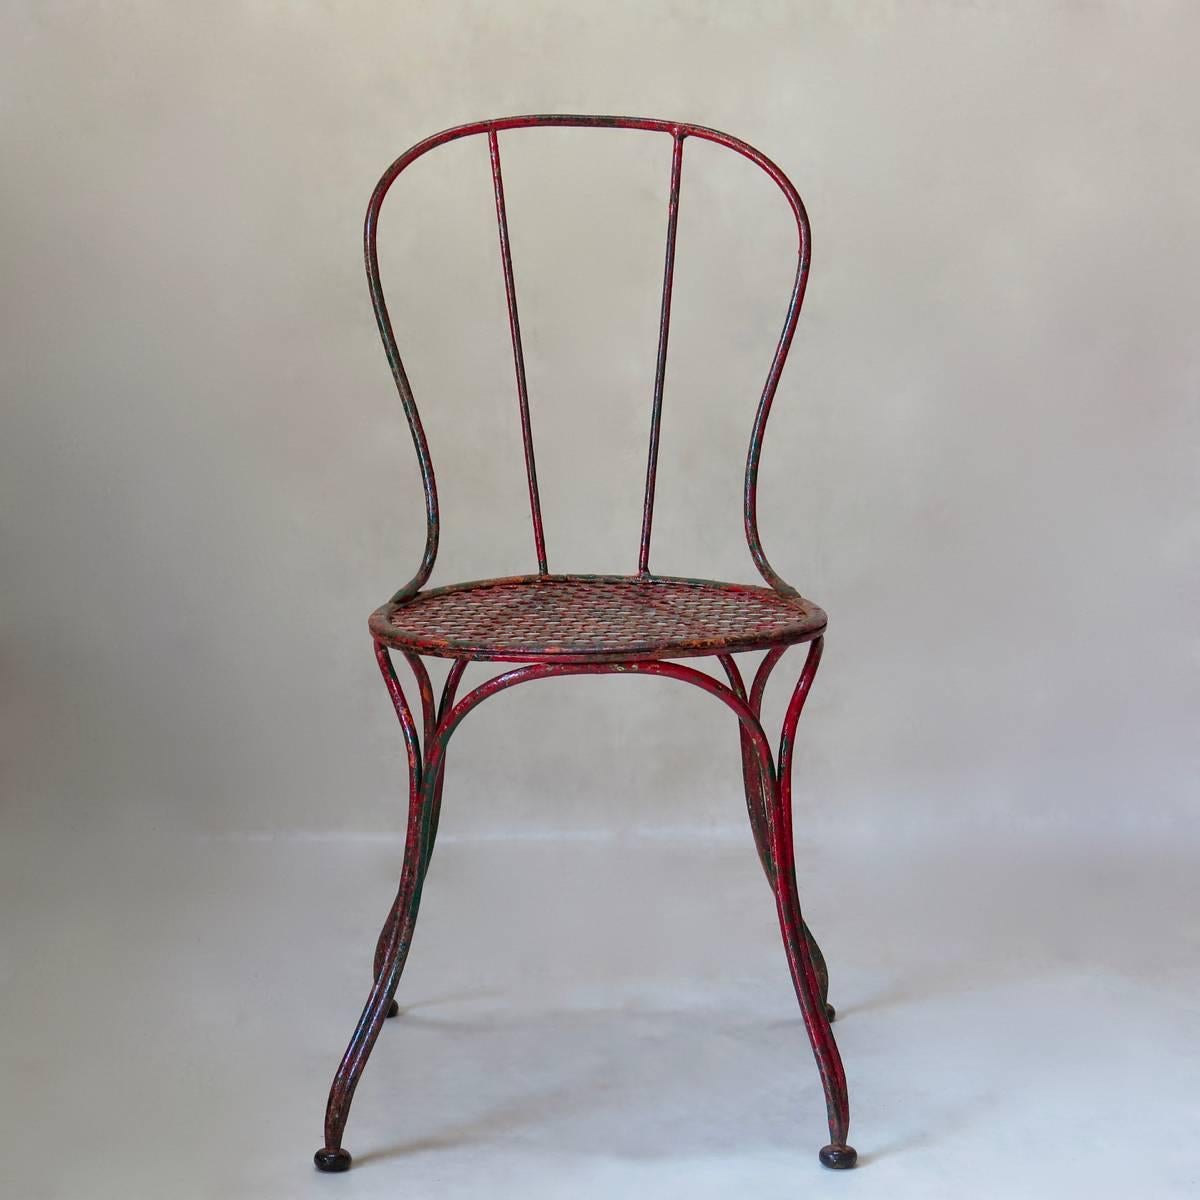 20th Century French circa 1900 Wrought Iron Chair and Armchair Set